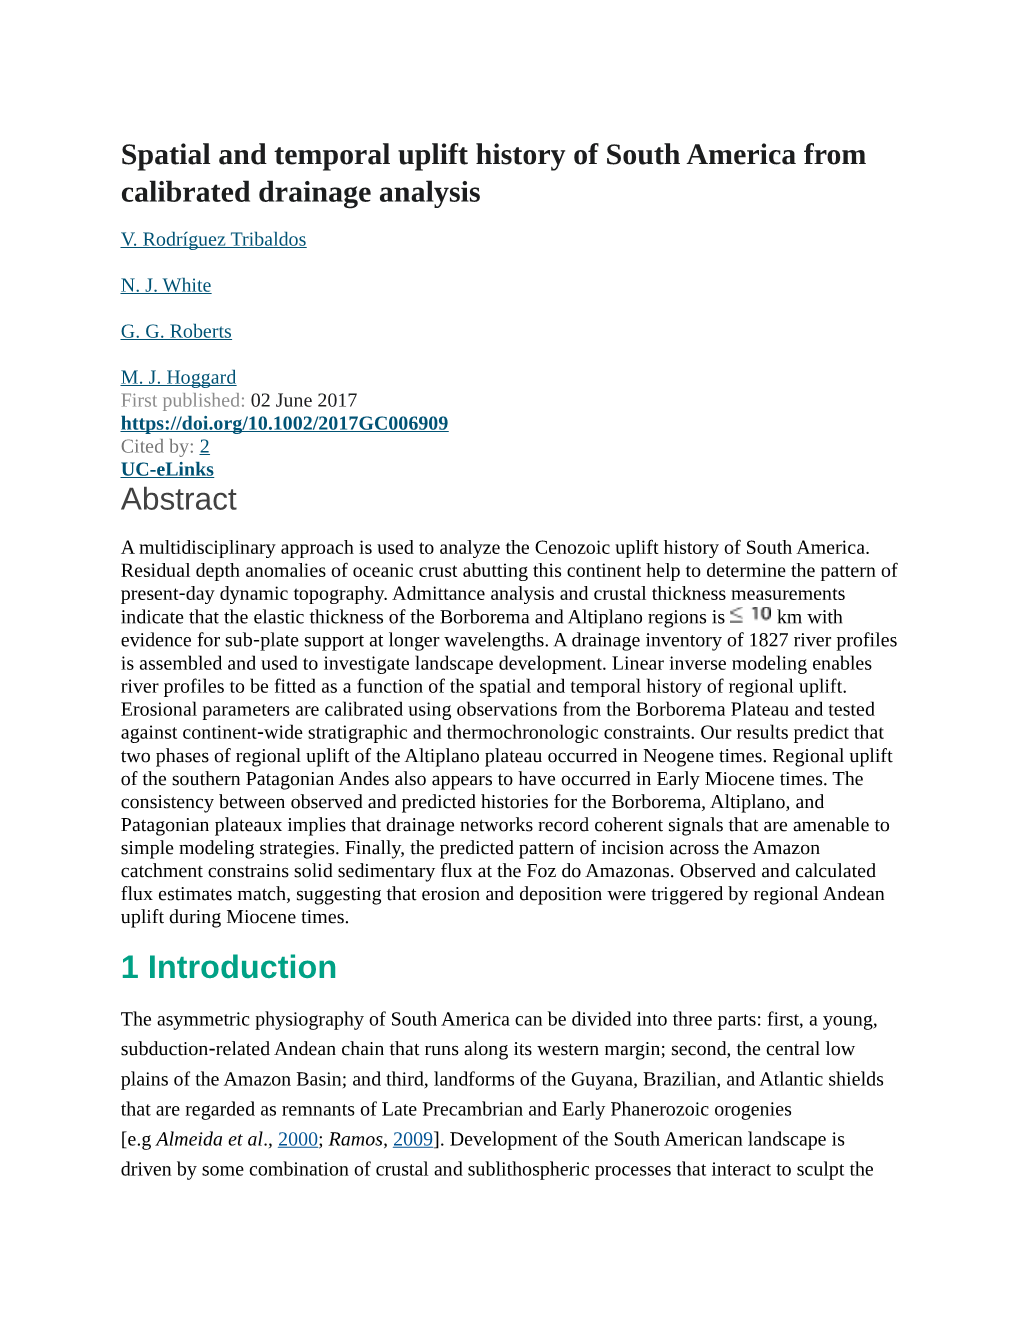 Spatial and Temporal Uplift History of South America from Calibrated Drainage Analysis